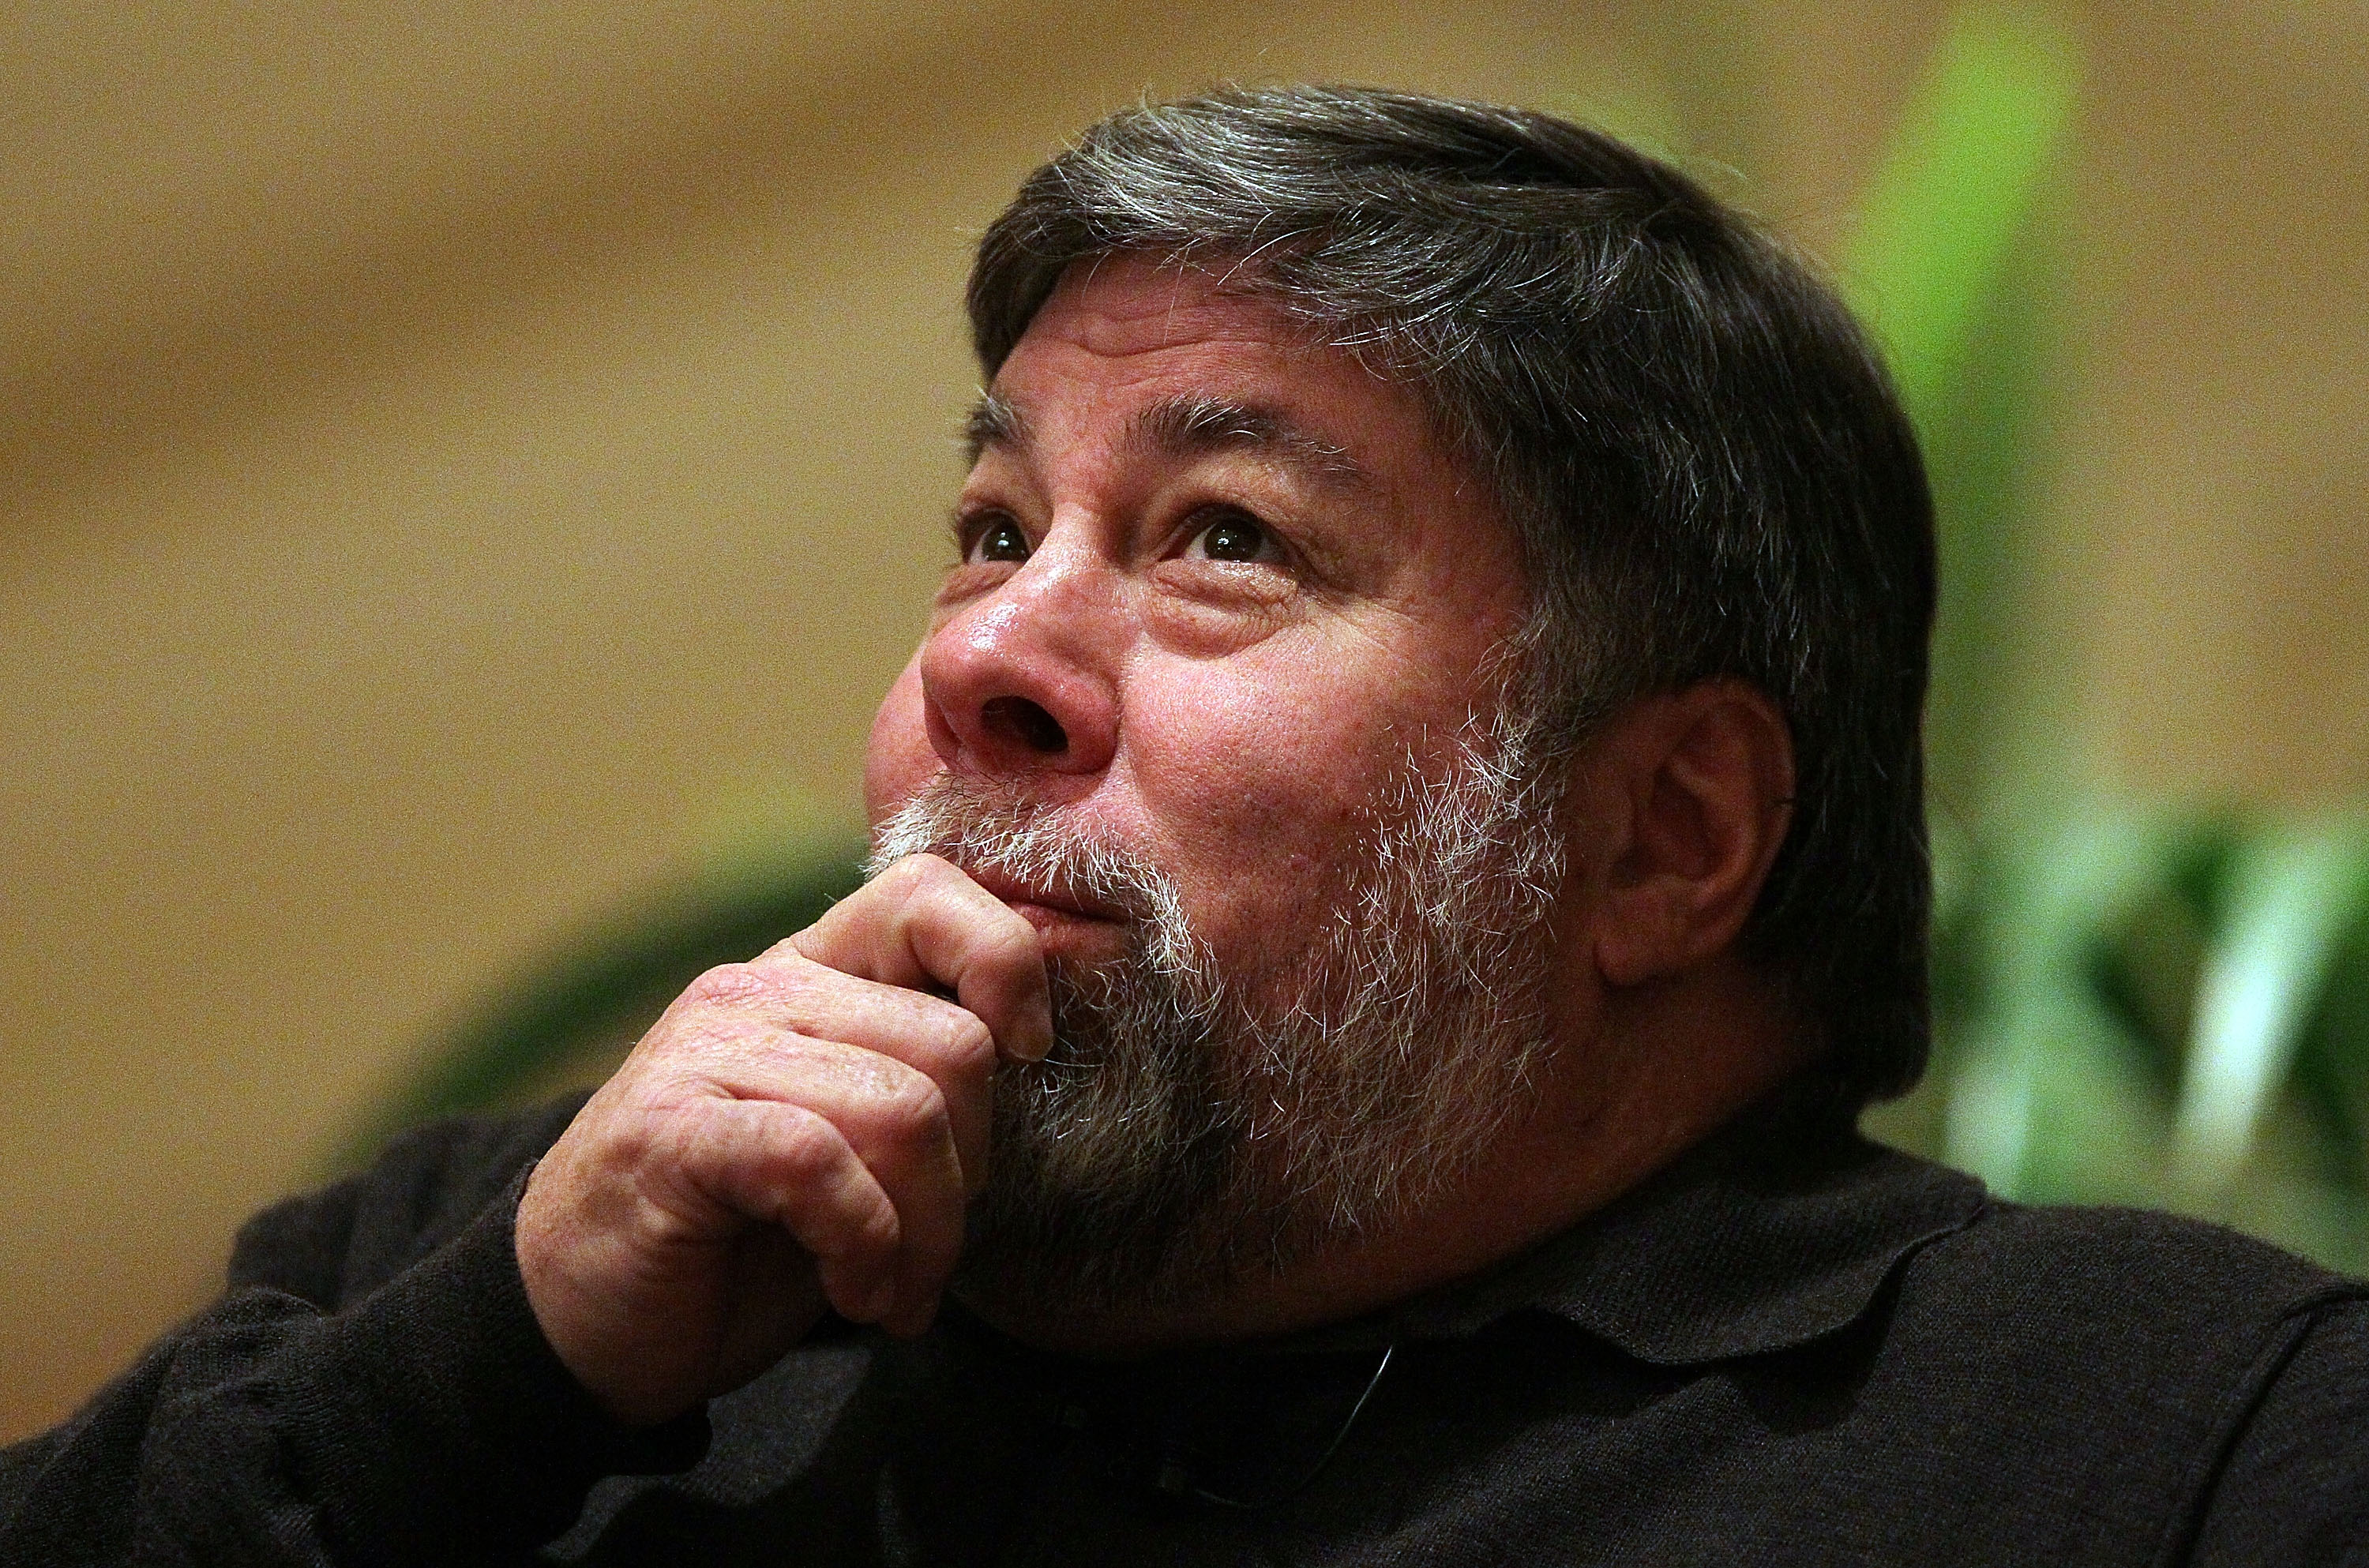 Apple Computer co-founder and philanthropist Steve Wozniak pauses while speaking at the Bay Area Discovery Museum's Discovery Forum on Feb. 1, 2010 in San Francisco. (Justin Sullivan—Getty Images)